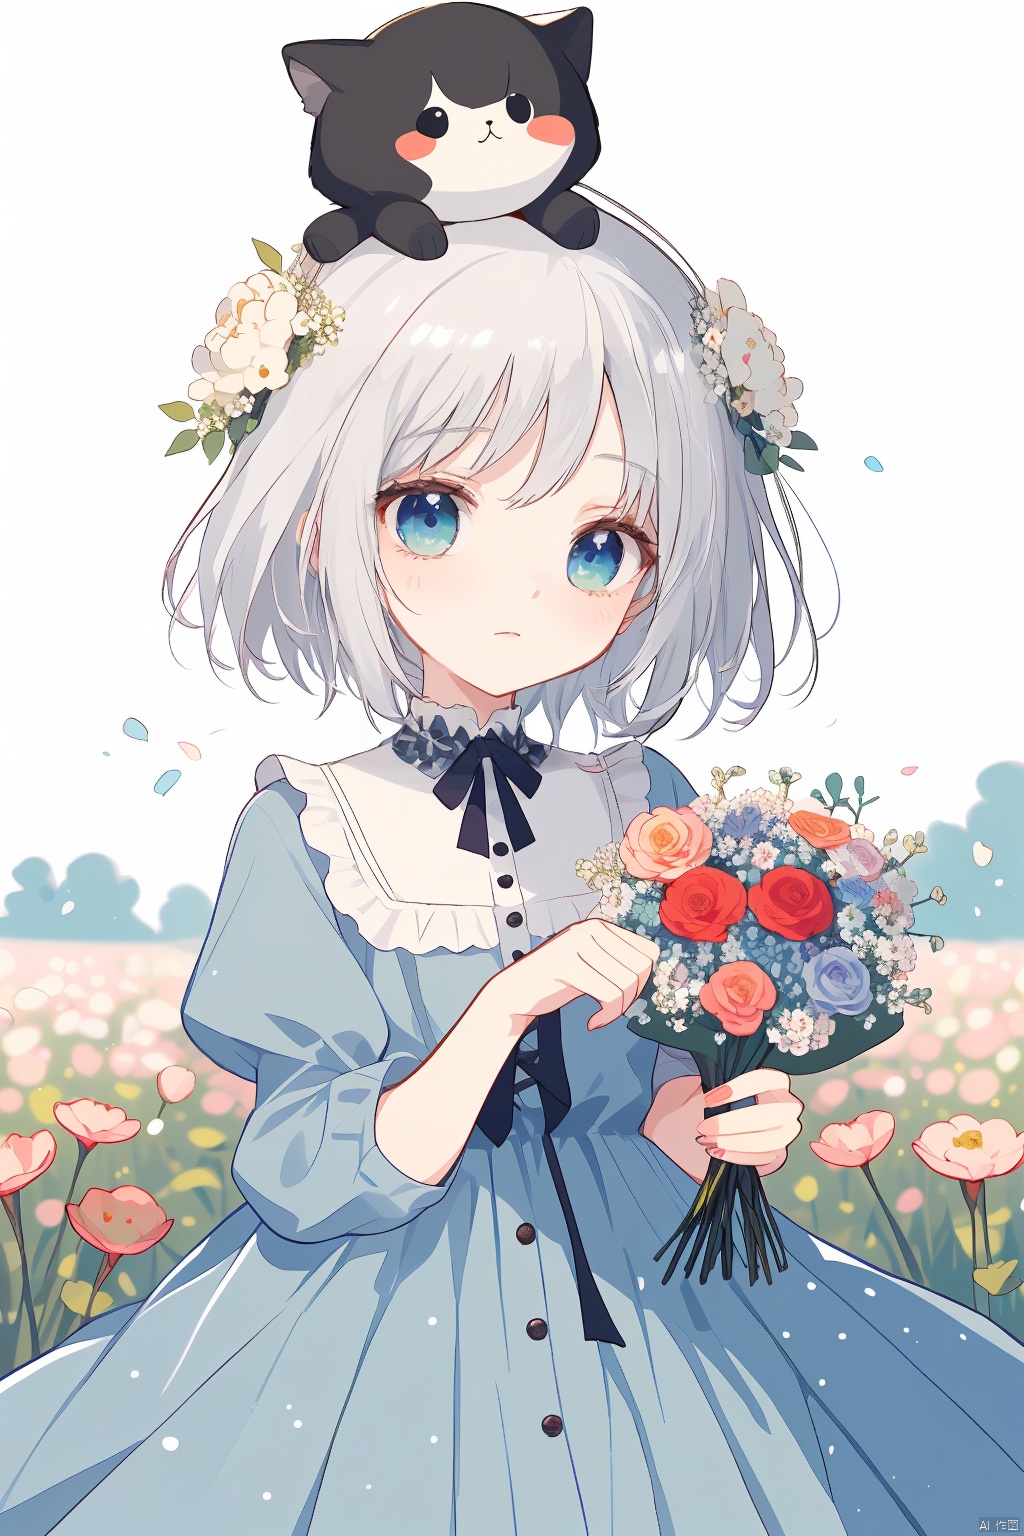 1 girl, cute, cute, smiling, in the flower field, holding a bouquet of flowers in her hand, wearing a blue dress, wearing a wreath on her head, touching her head, and making a gesture